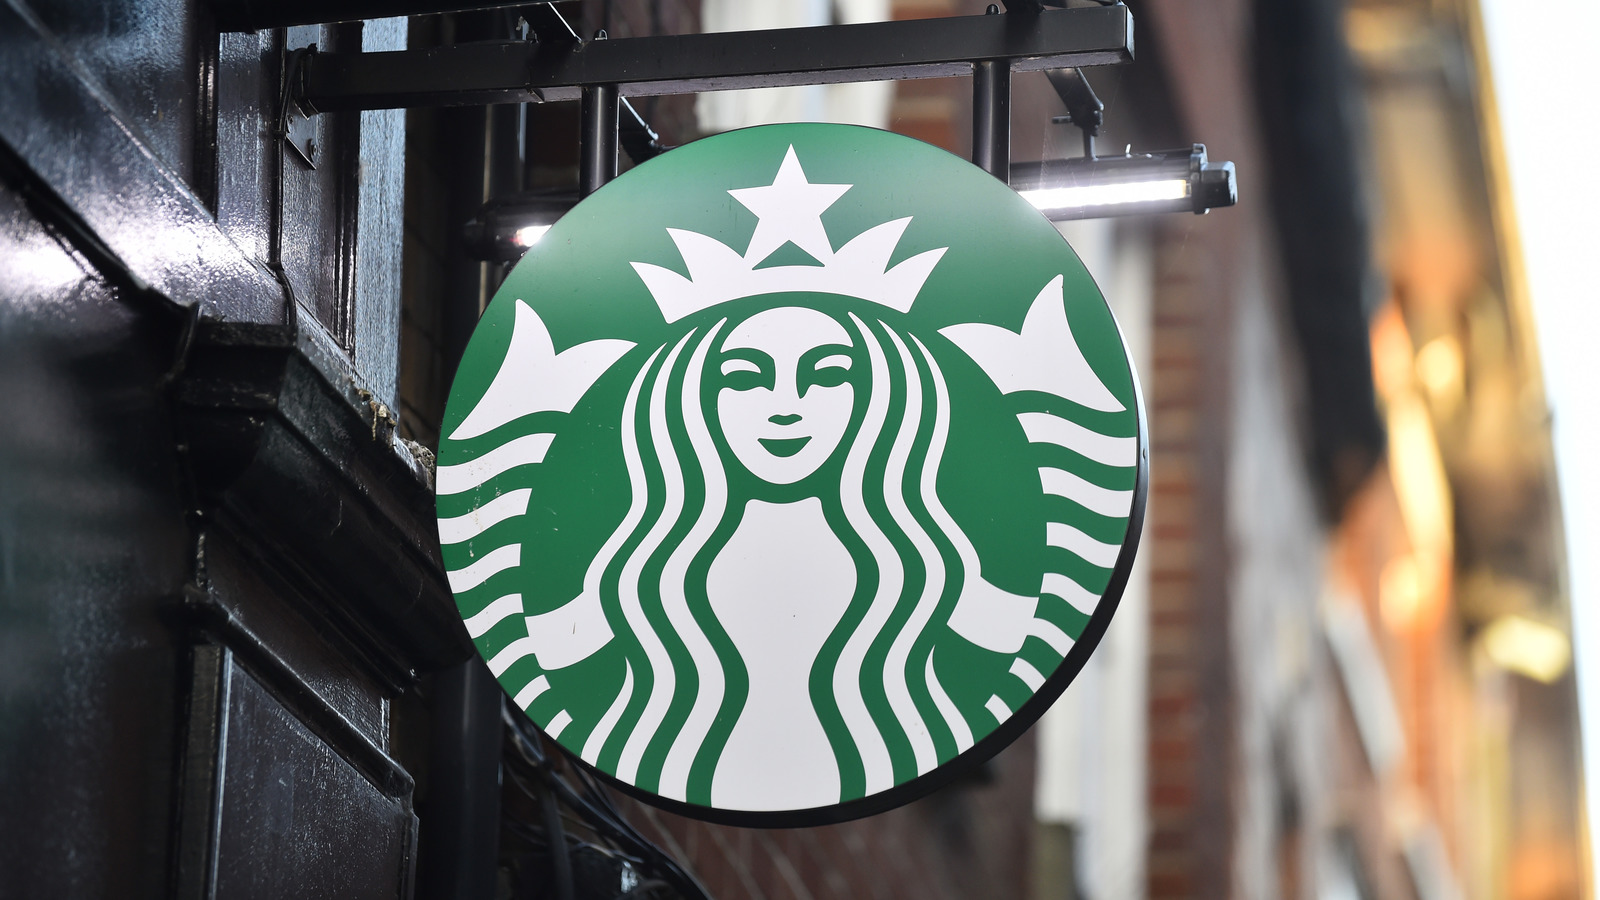 What time will Starbucks close Christmas Eve? 